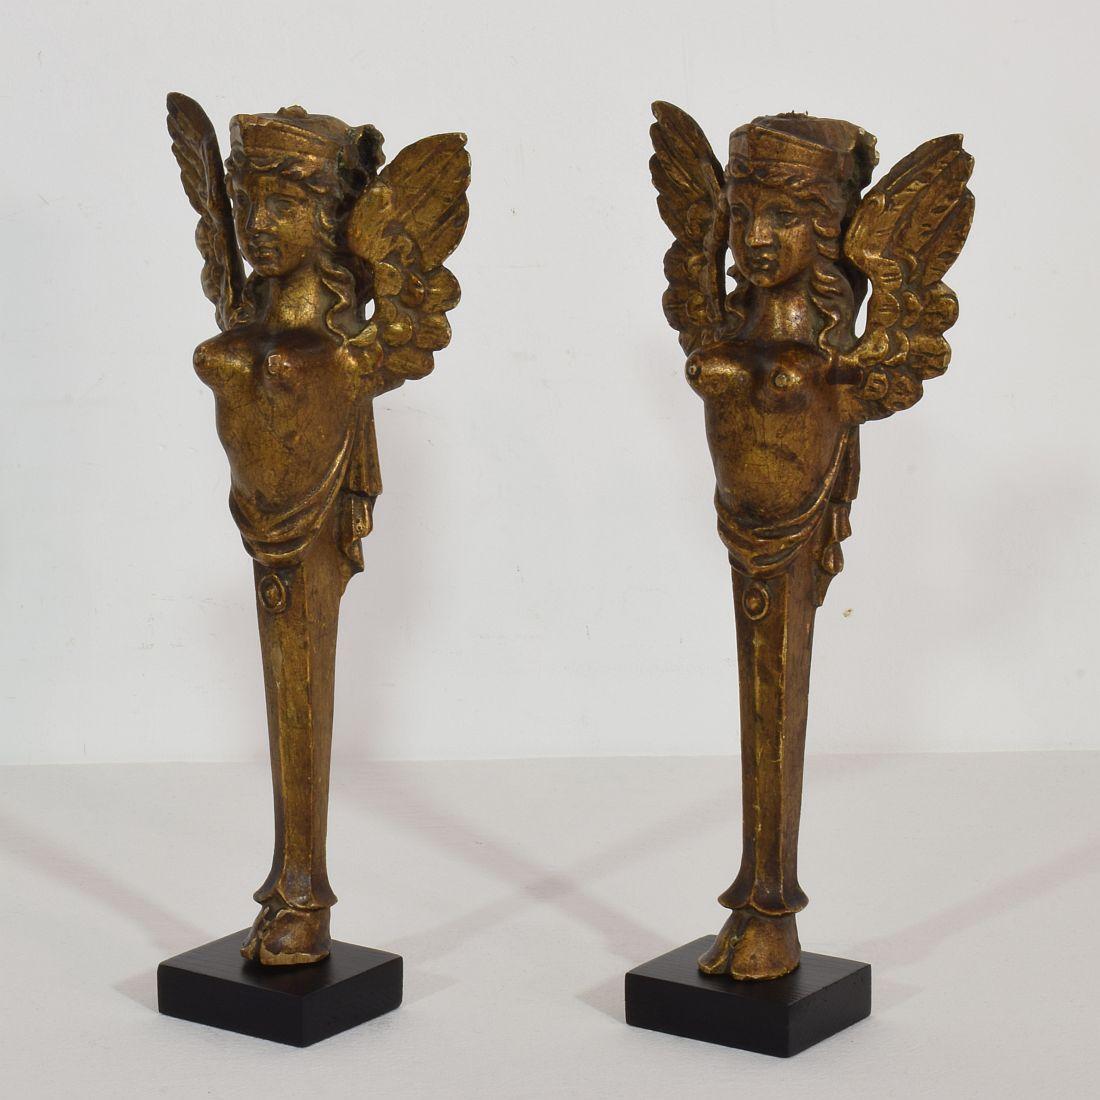 Nice couple of two giltwood neoclassical ornaments,
France, circa 1800-1850. Weathered, small losses and old repairs. Measurement here below includes the wooden base.